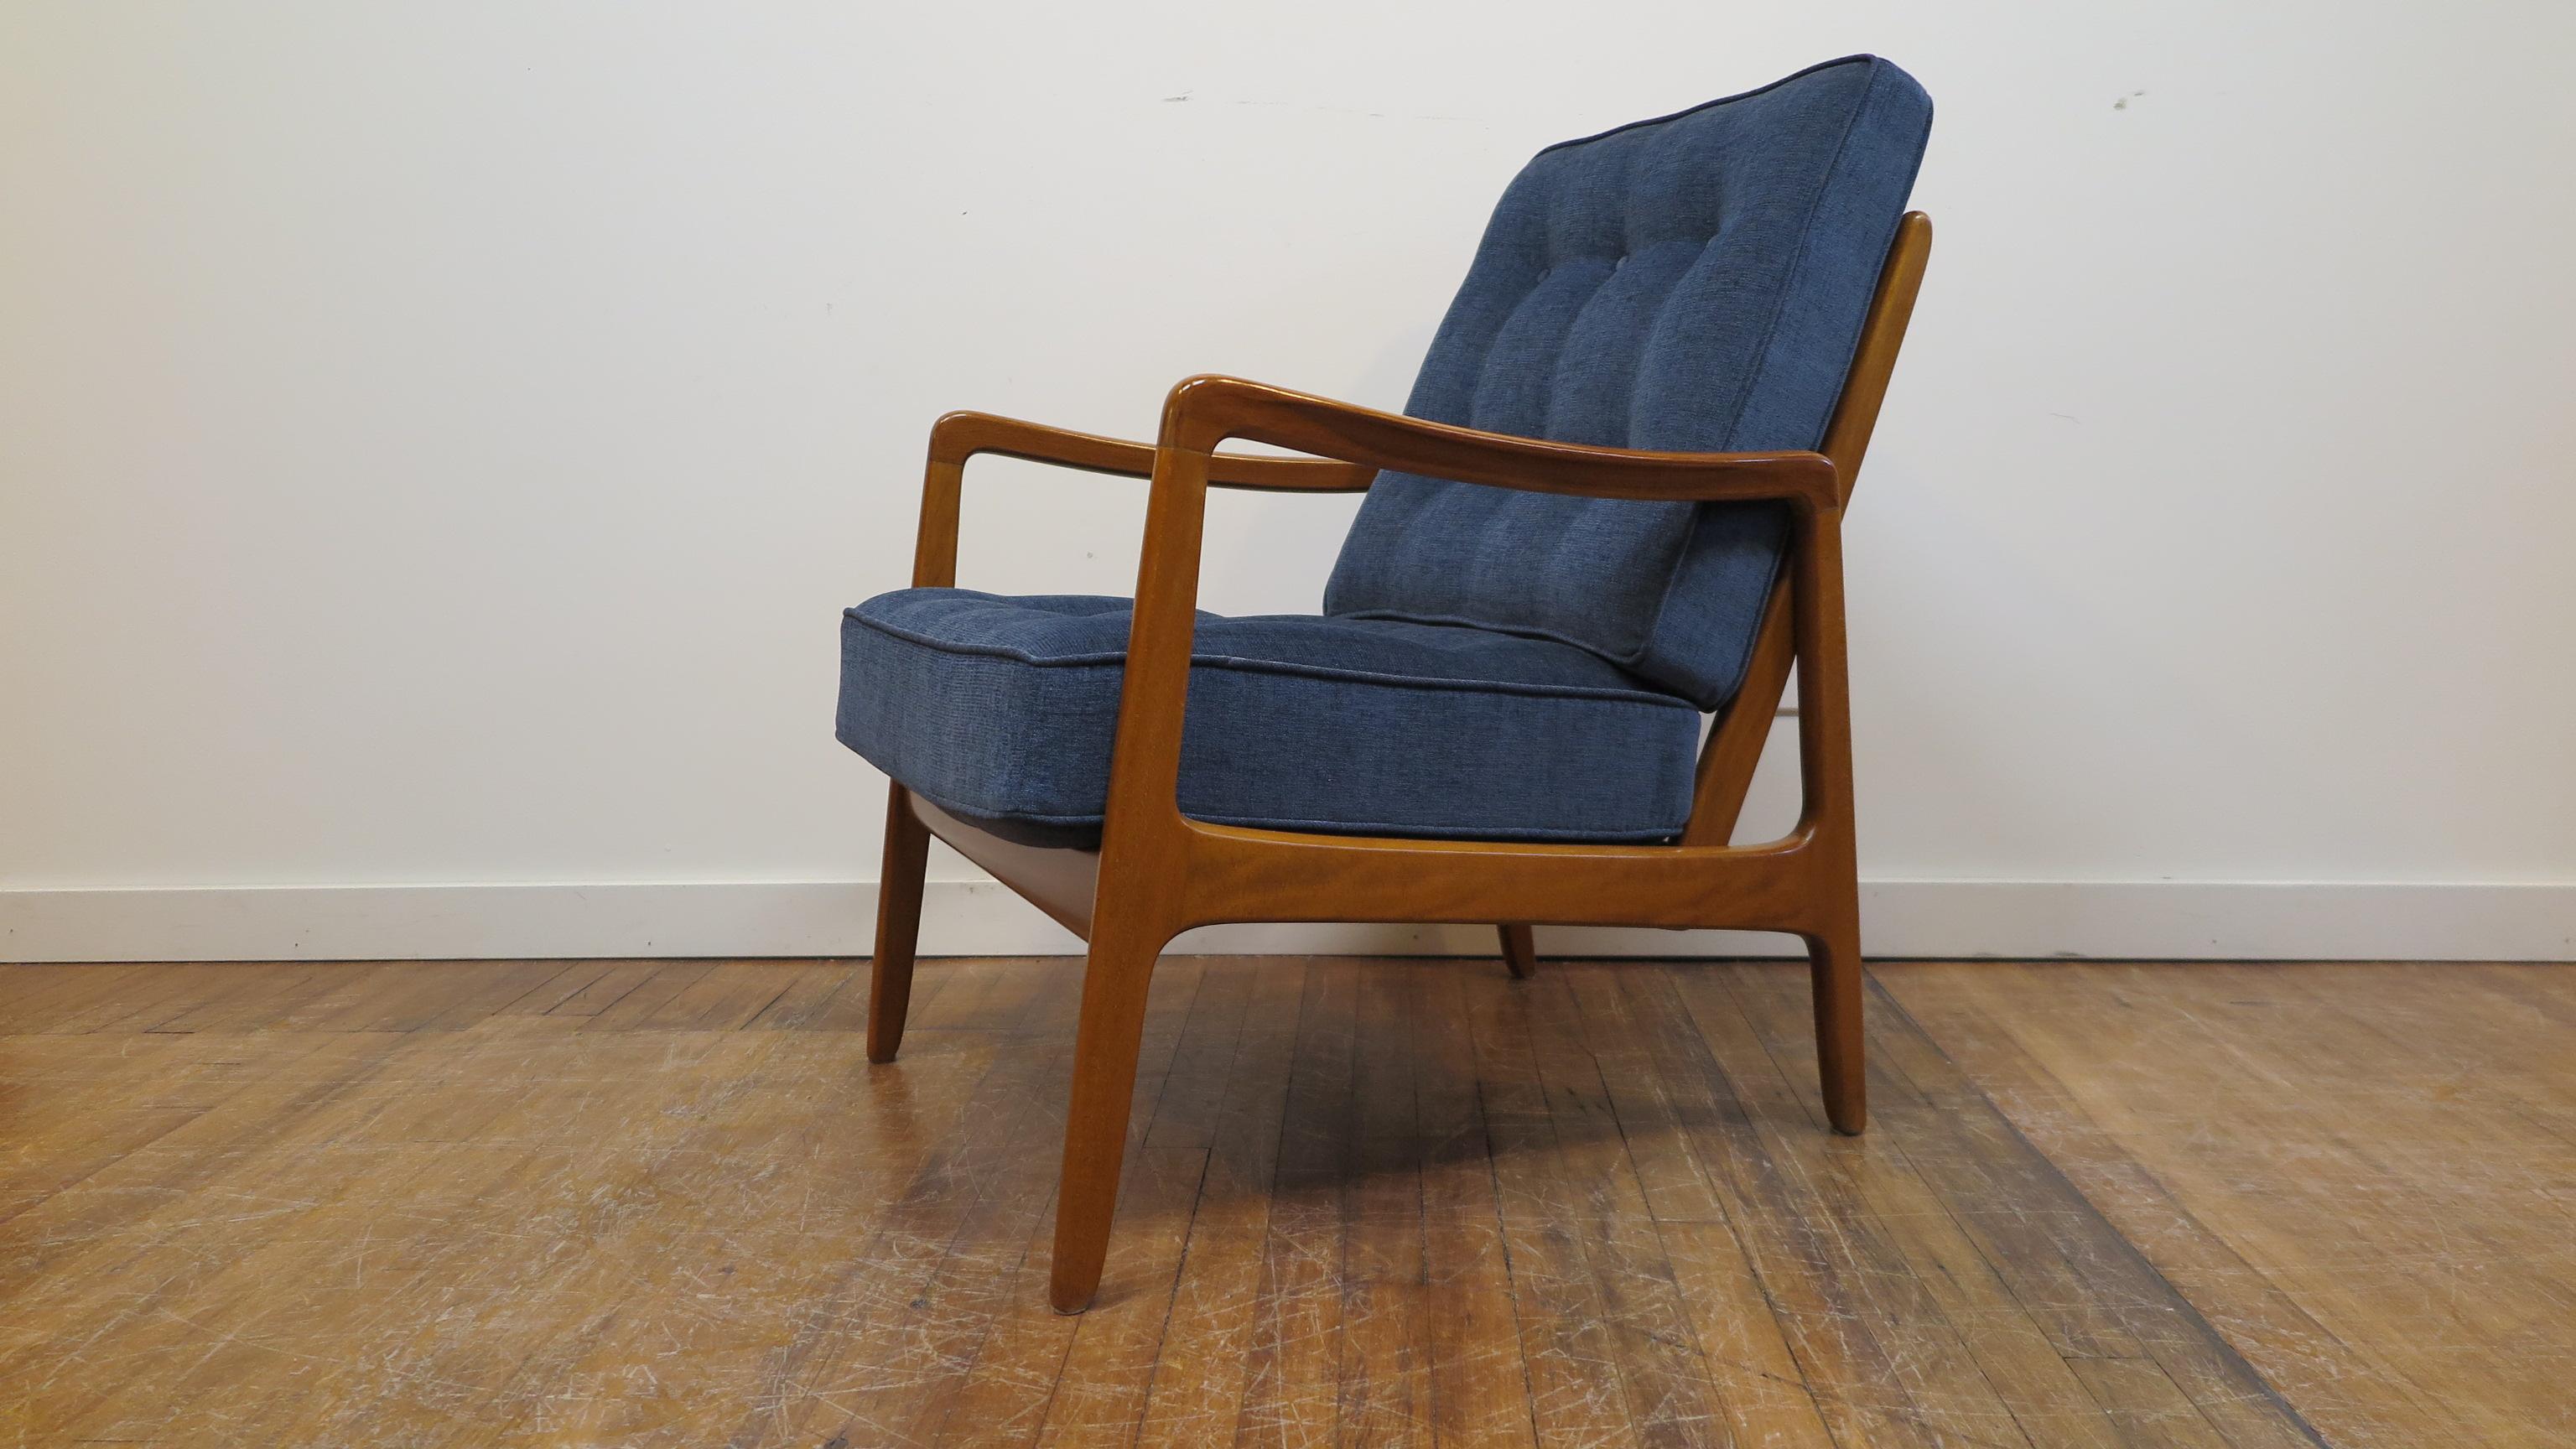 Ole Wanscher lounge chair FD109 France & Daverkosen. An iconic design, this particular chair is of early production period between 1952-56. The original spring marshal units that make up the seat and back rest have been restored and maintained. So